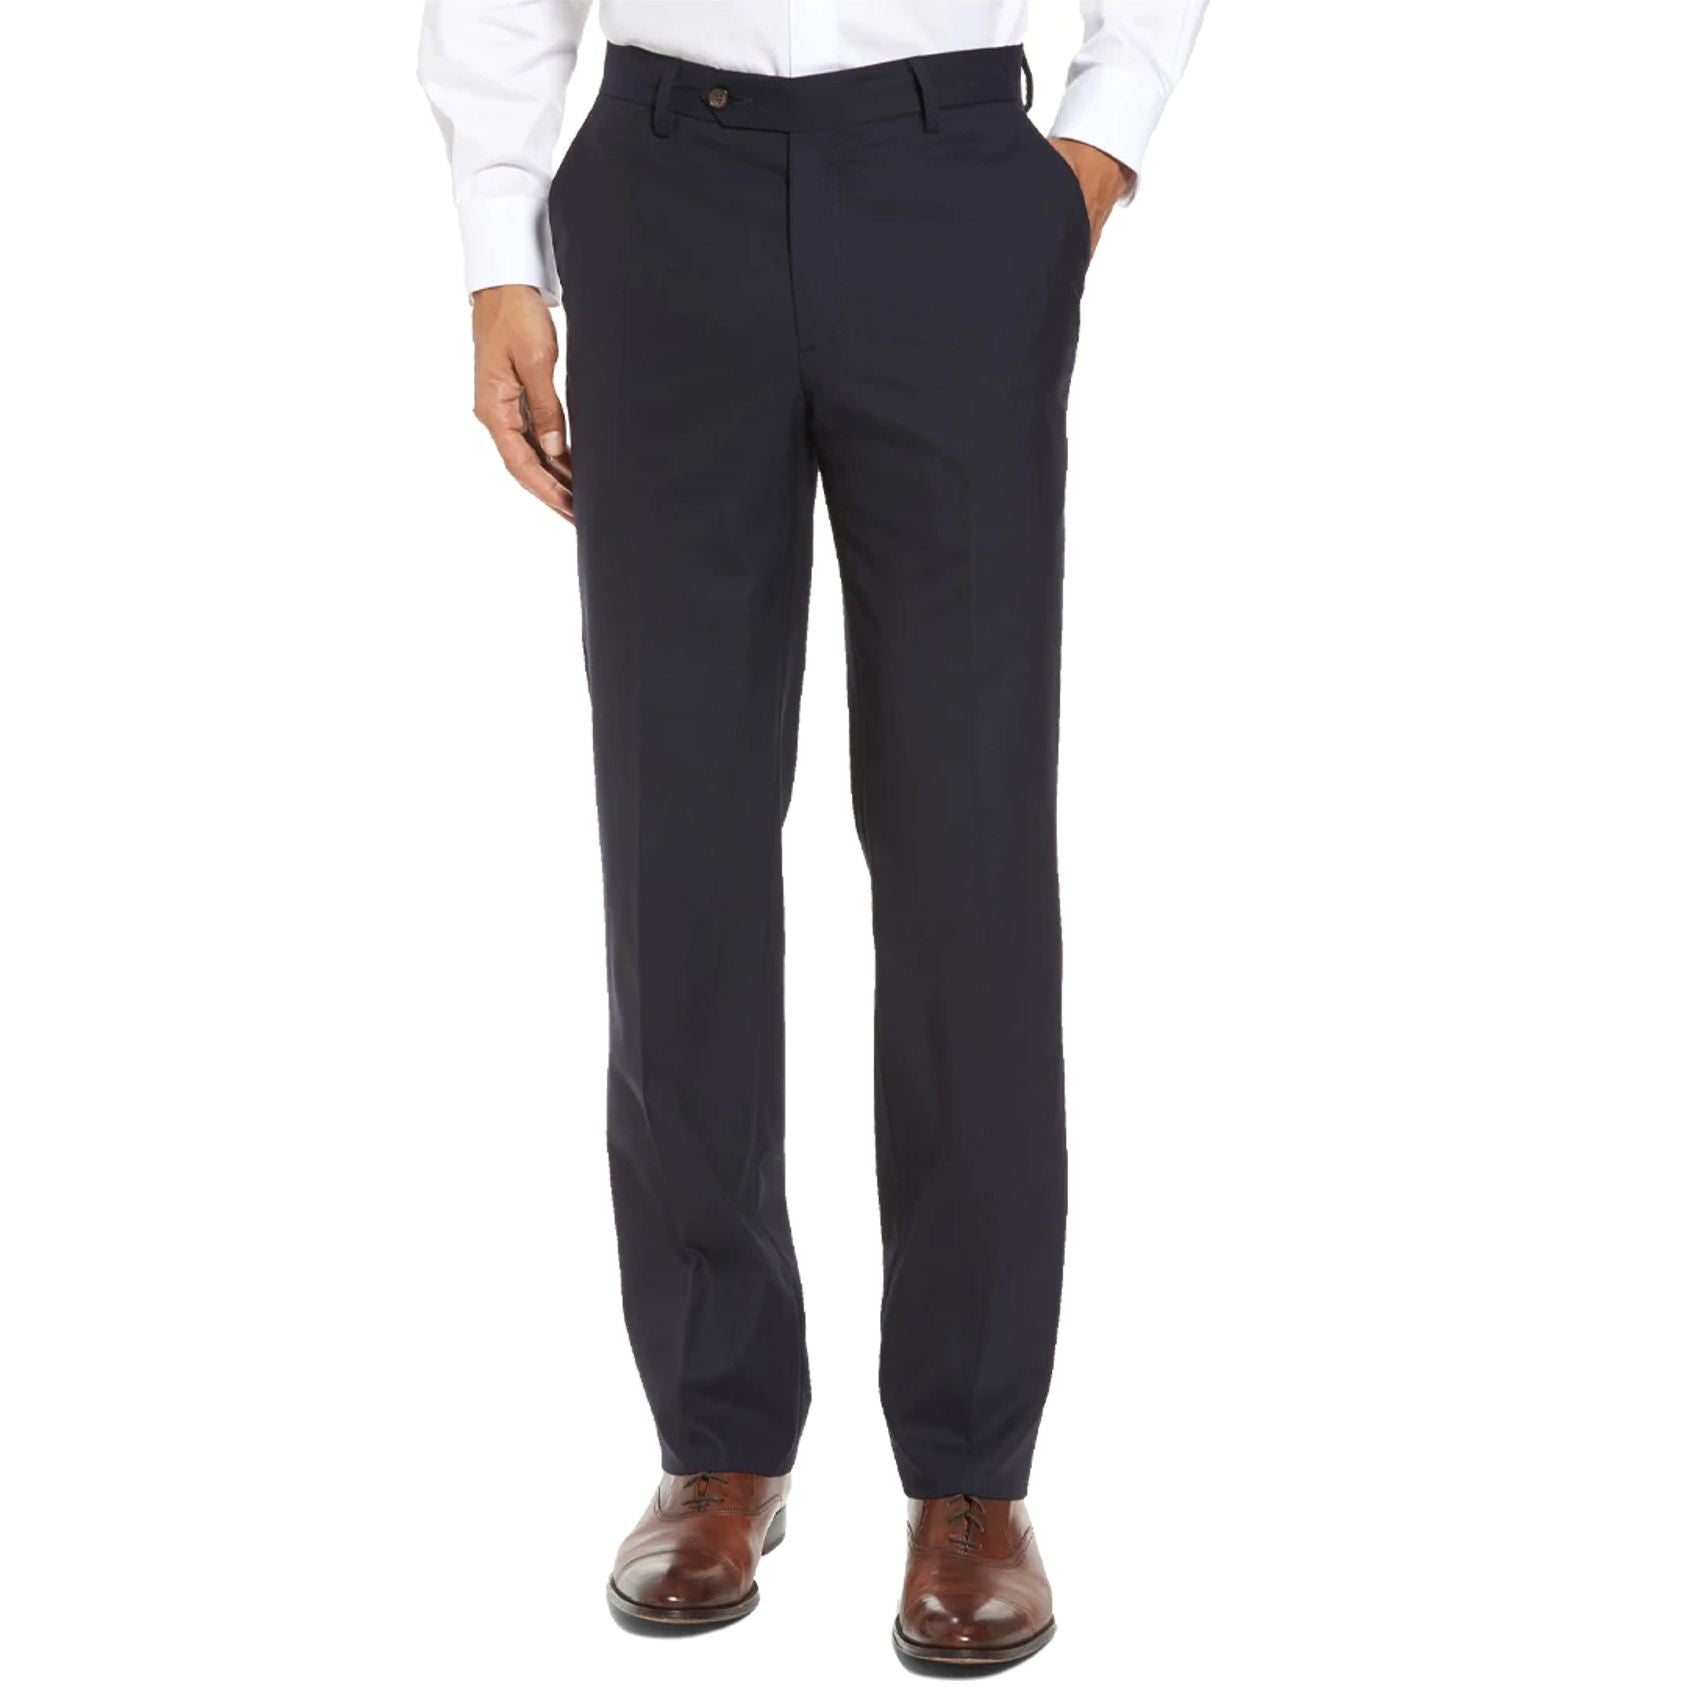 Stretch Worsted Wool Tropical Trouser in Navy (Tribeca Modern Plain Front) by Berle